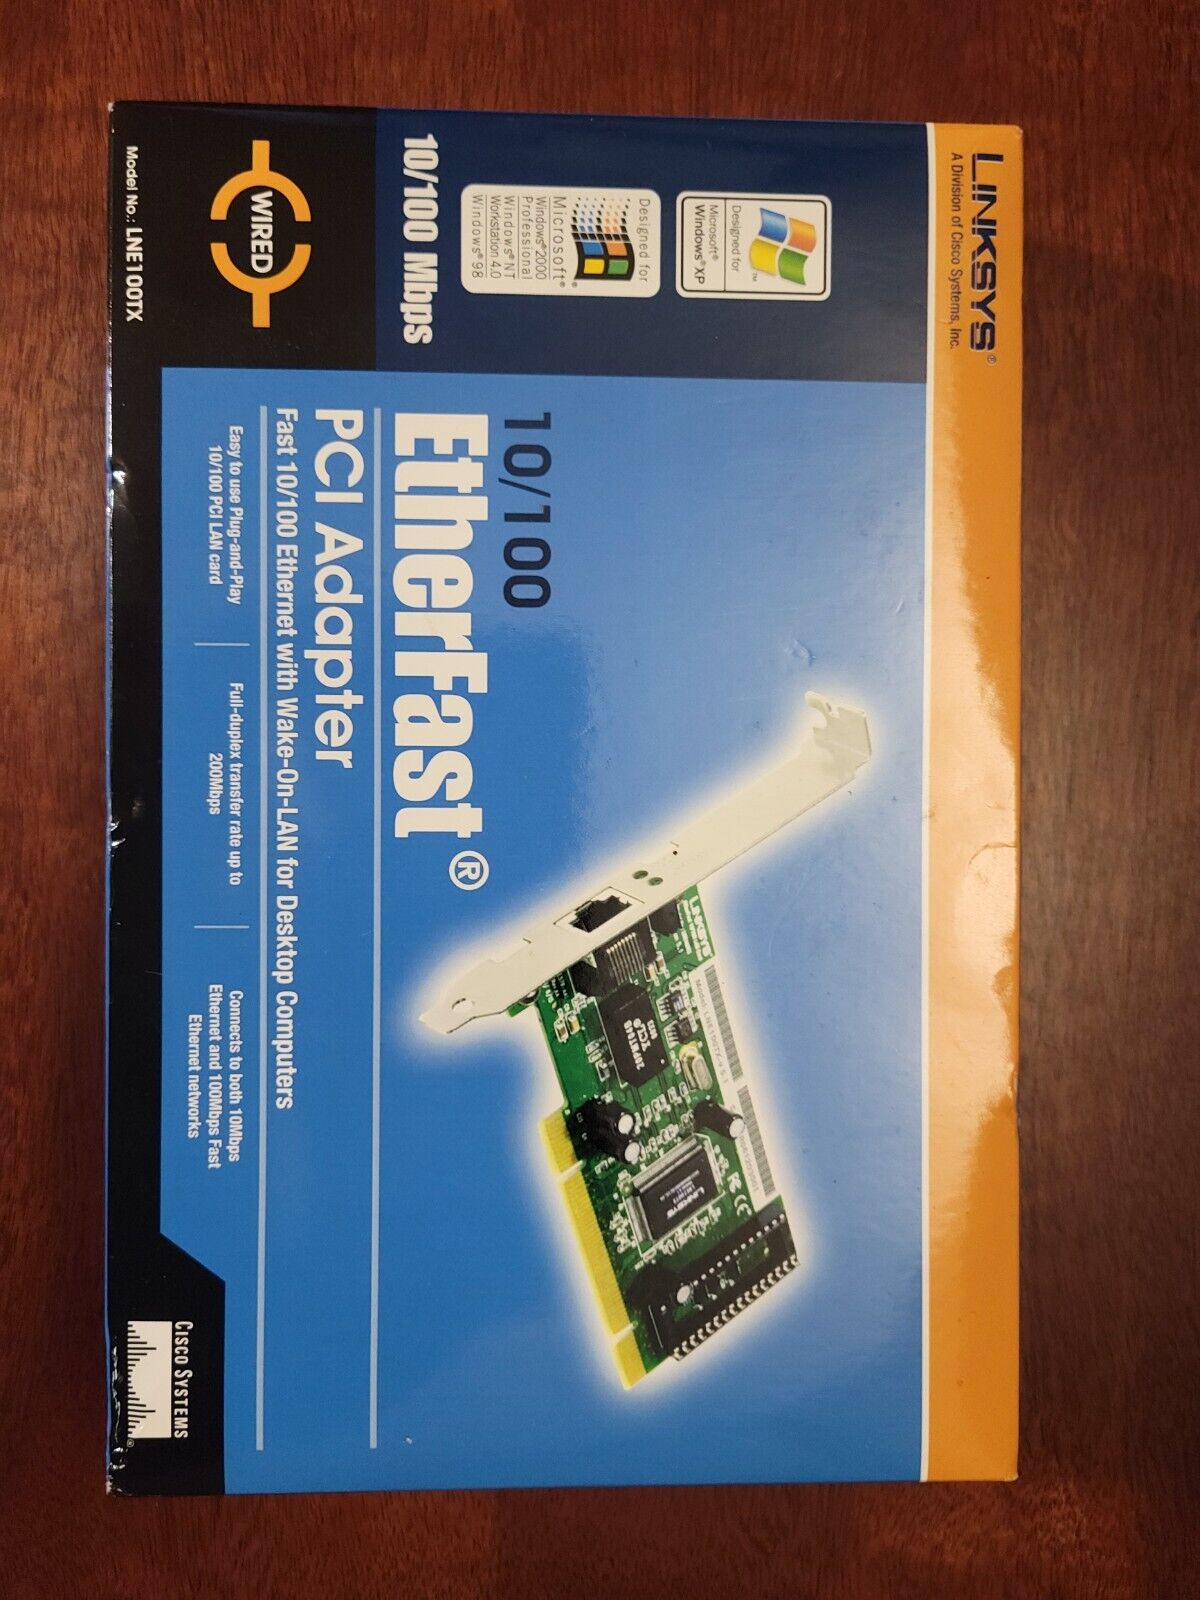 LINKSYS ETHERFAST 10/100 LAN CARD NETWORK COMPLETE NEW